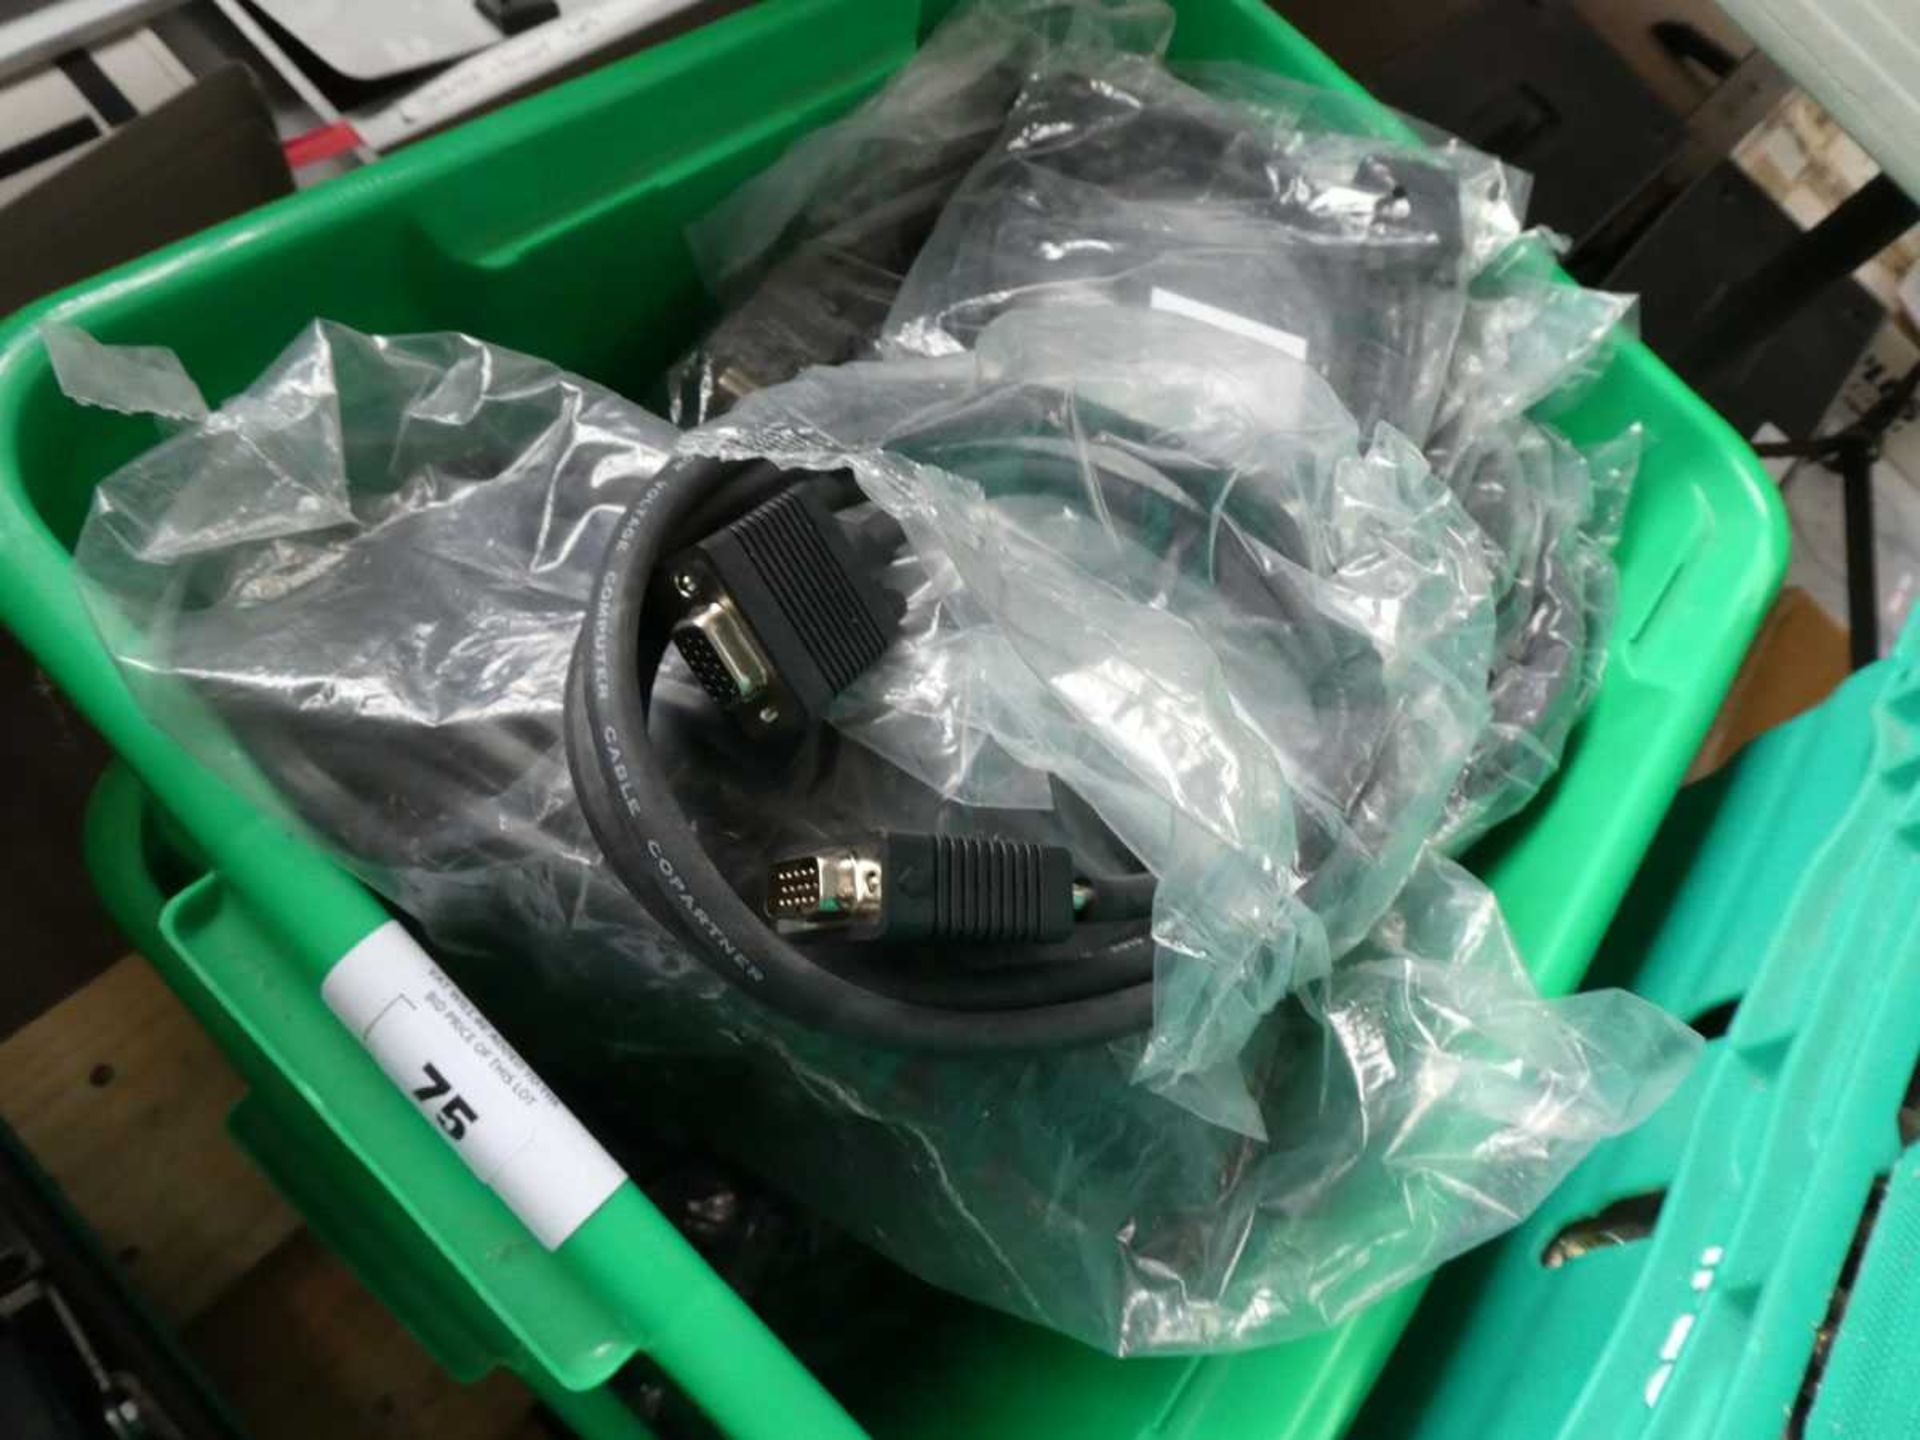 +VAT 2 green trays of VGA cables - Image 2 of 2